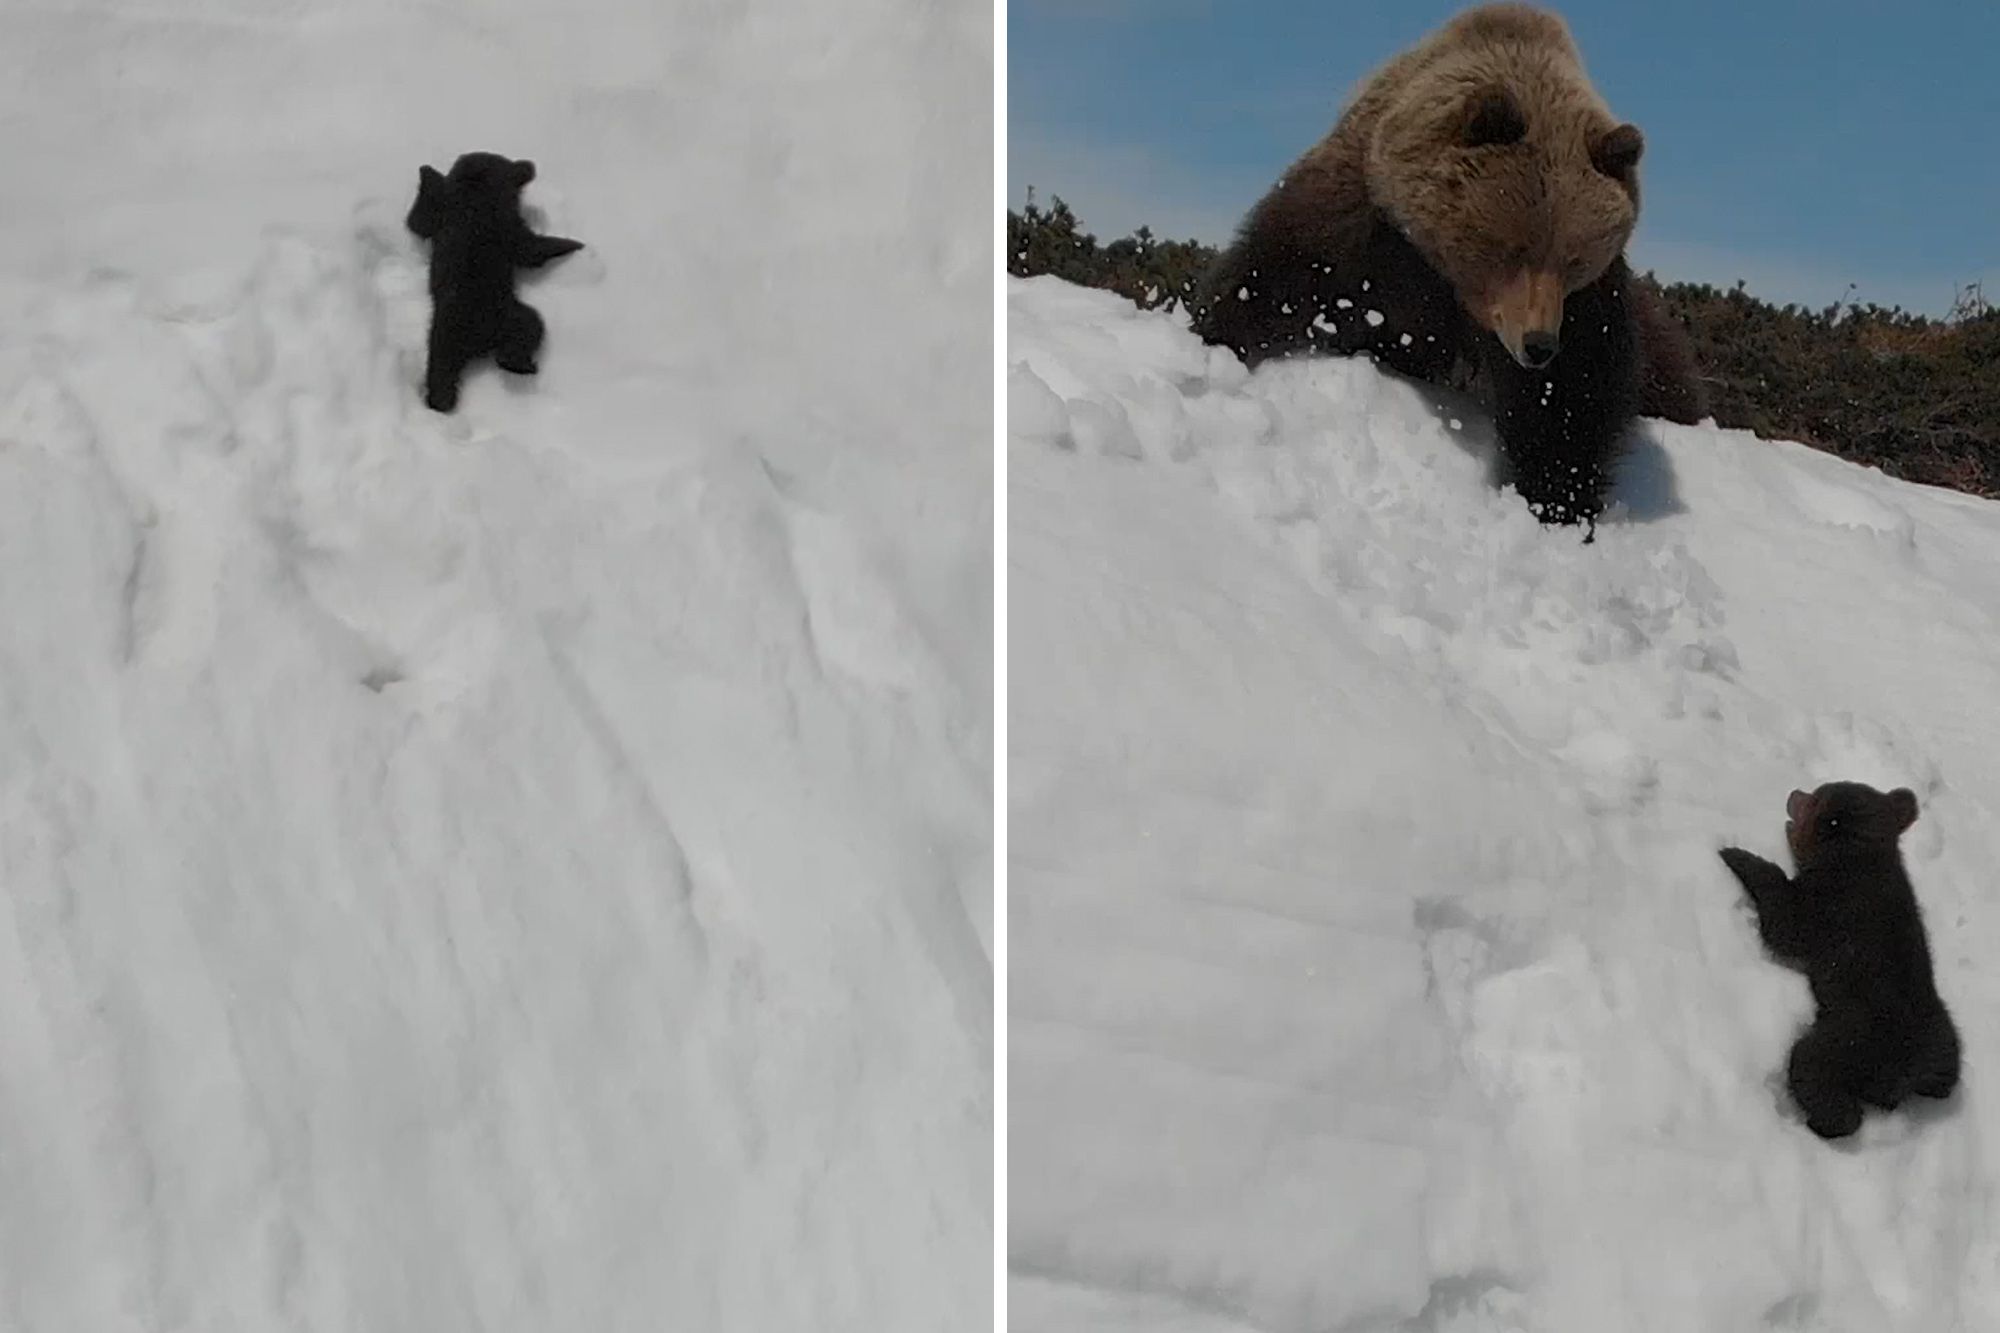 We could all learn a lesson from this baby bear: Look up & don't give up.